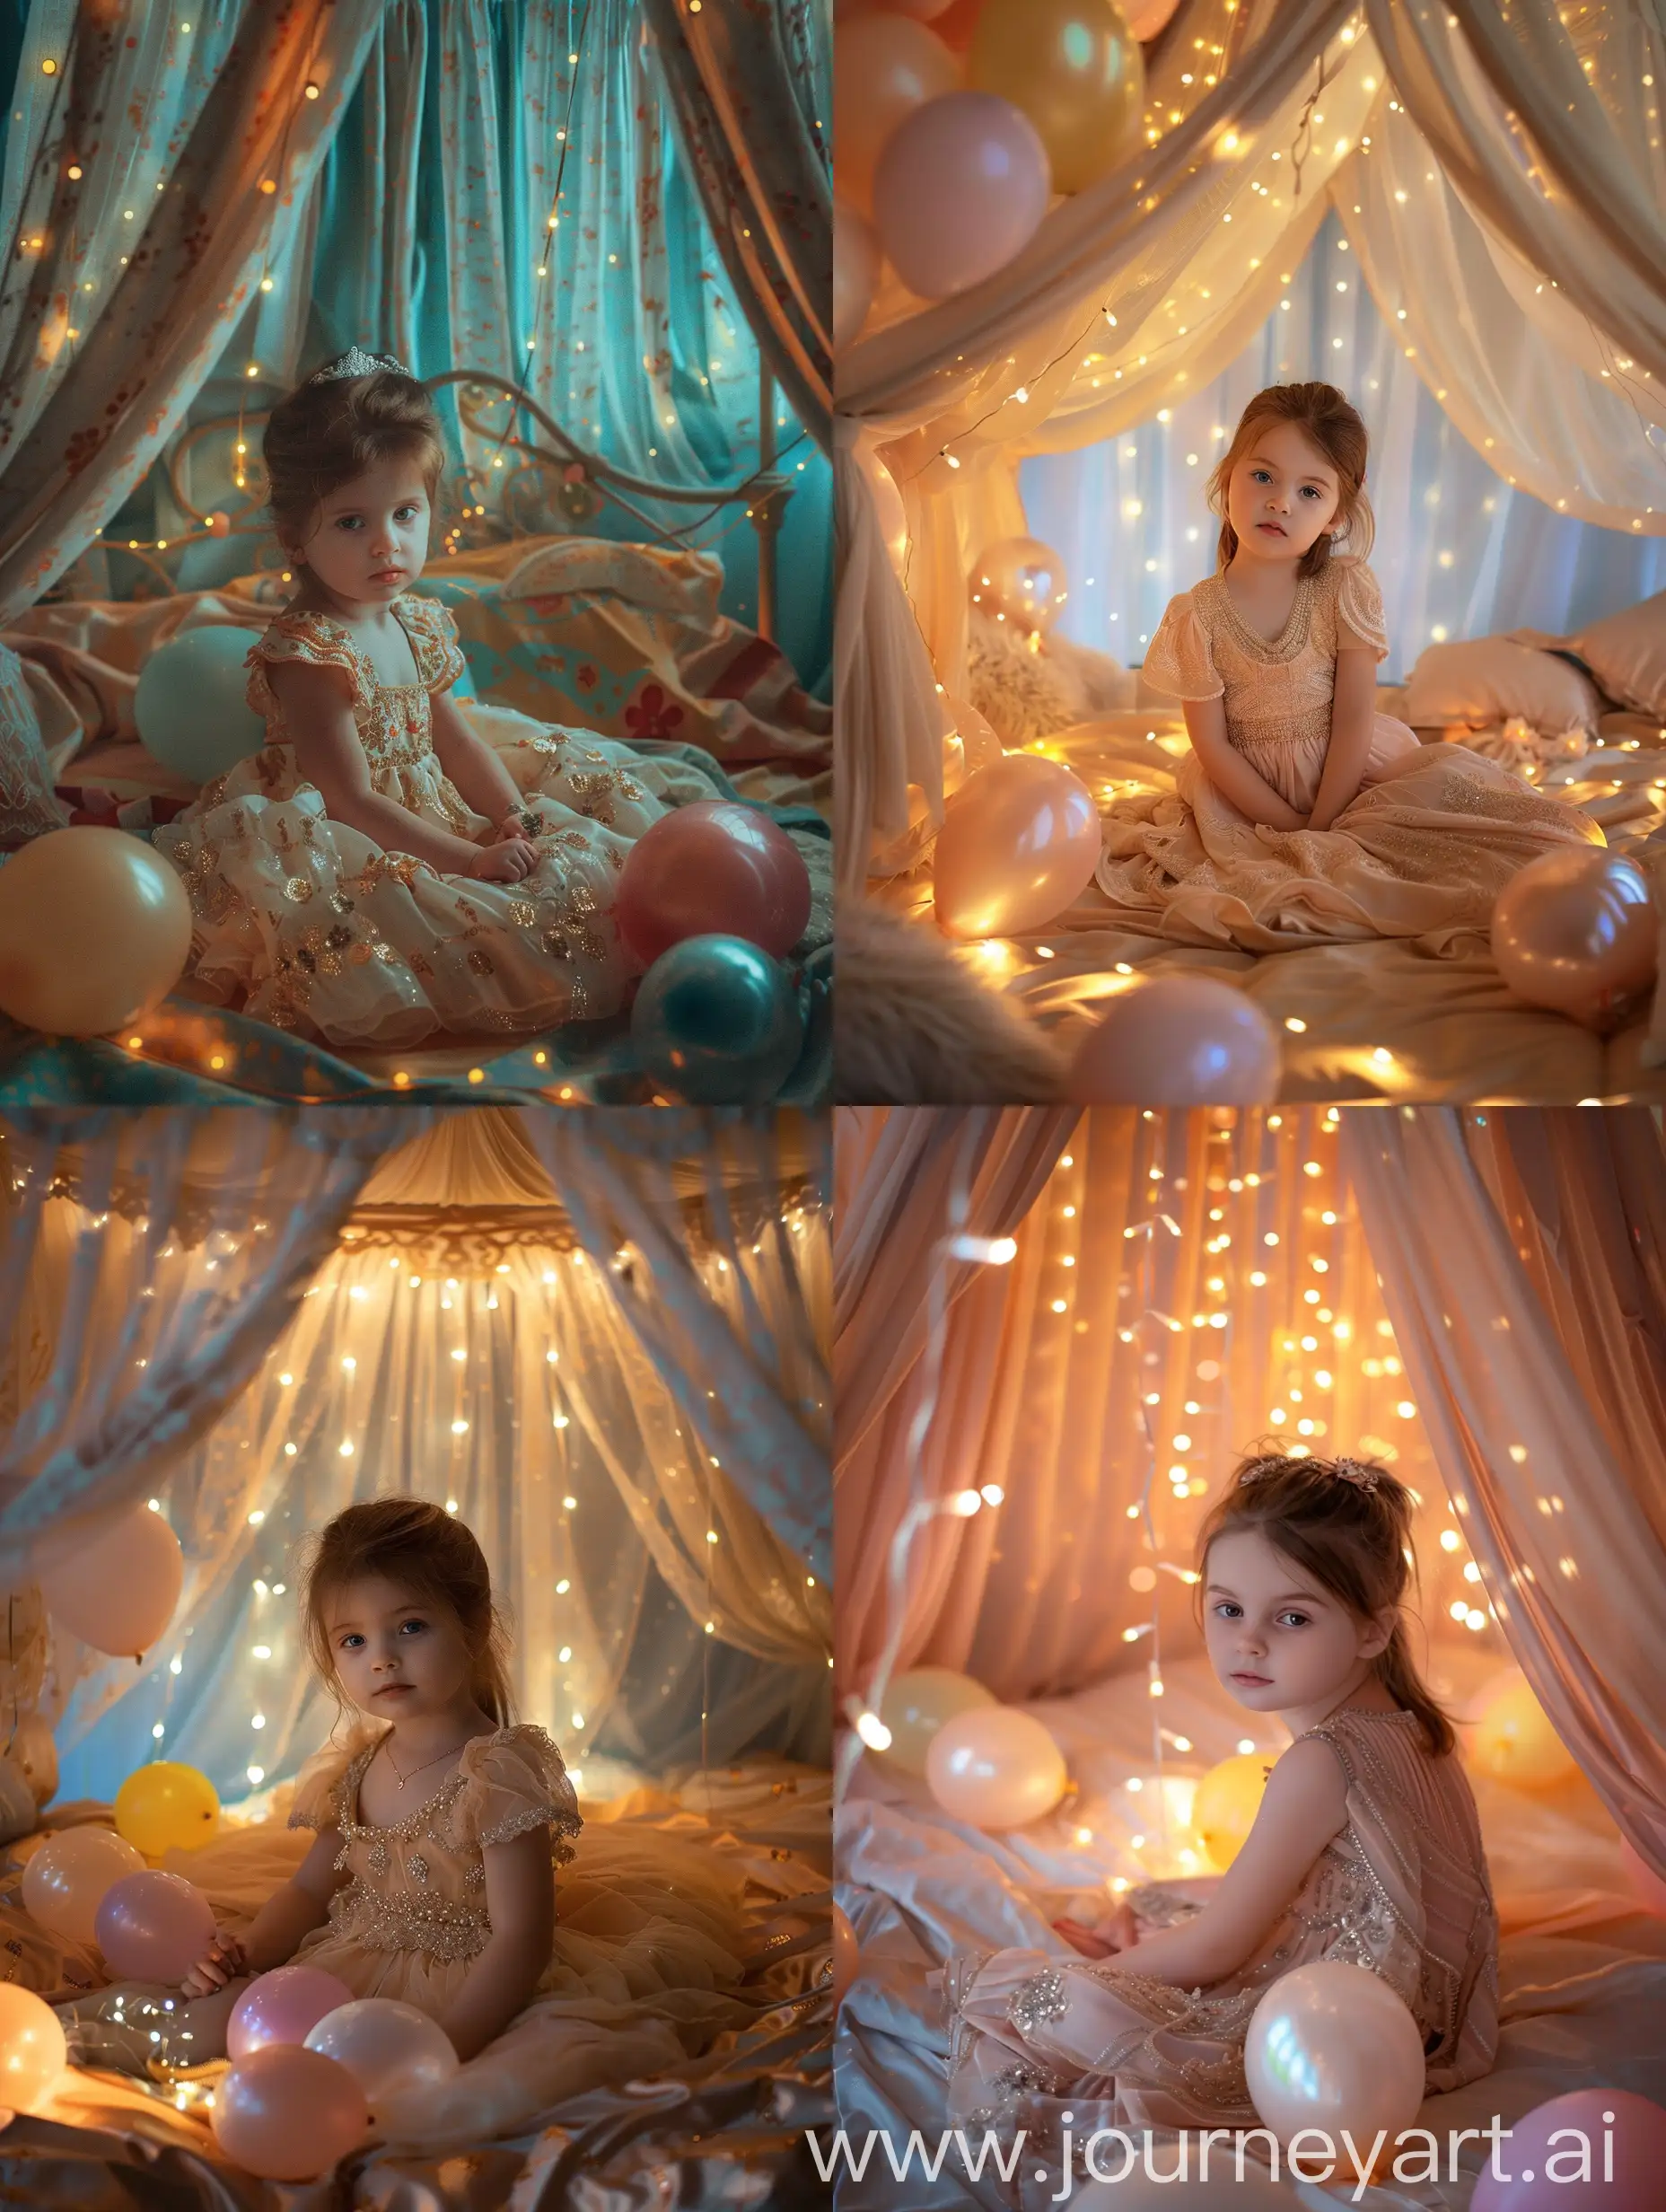 Adorable-Girl-in-Glowing-Canopy-Bed-with-Balloons-Realistic-Hyperrealism-CloseUp-Photo